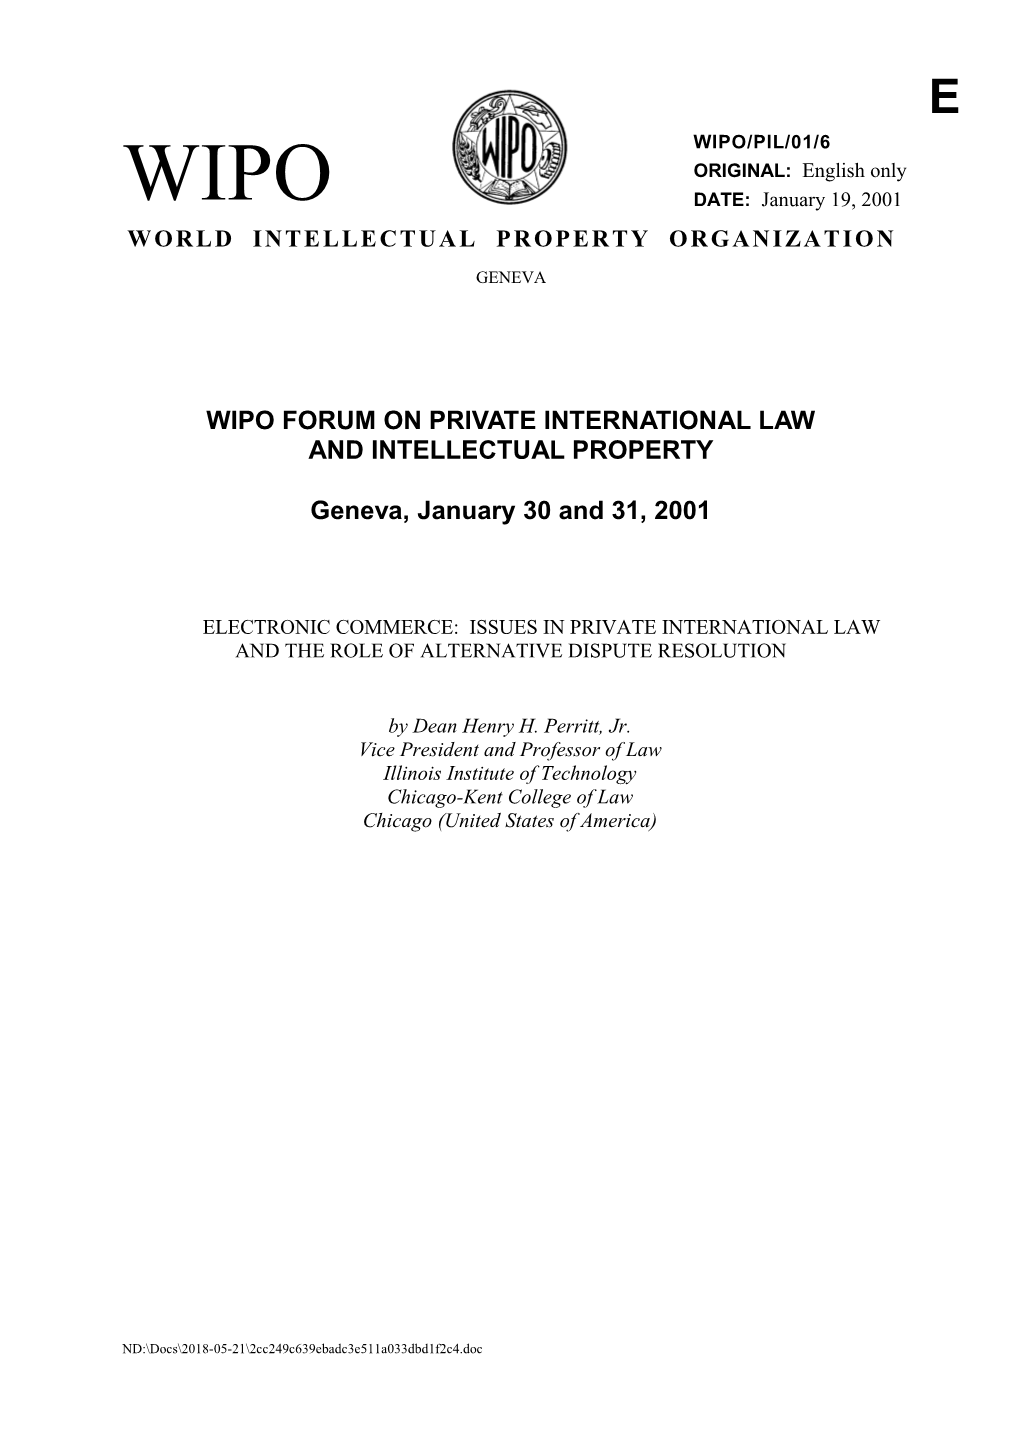 WIPO/PIL/01/6: Electronic Commerce: Issues in Private International Law and the Role Of